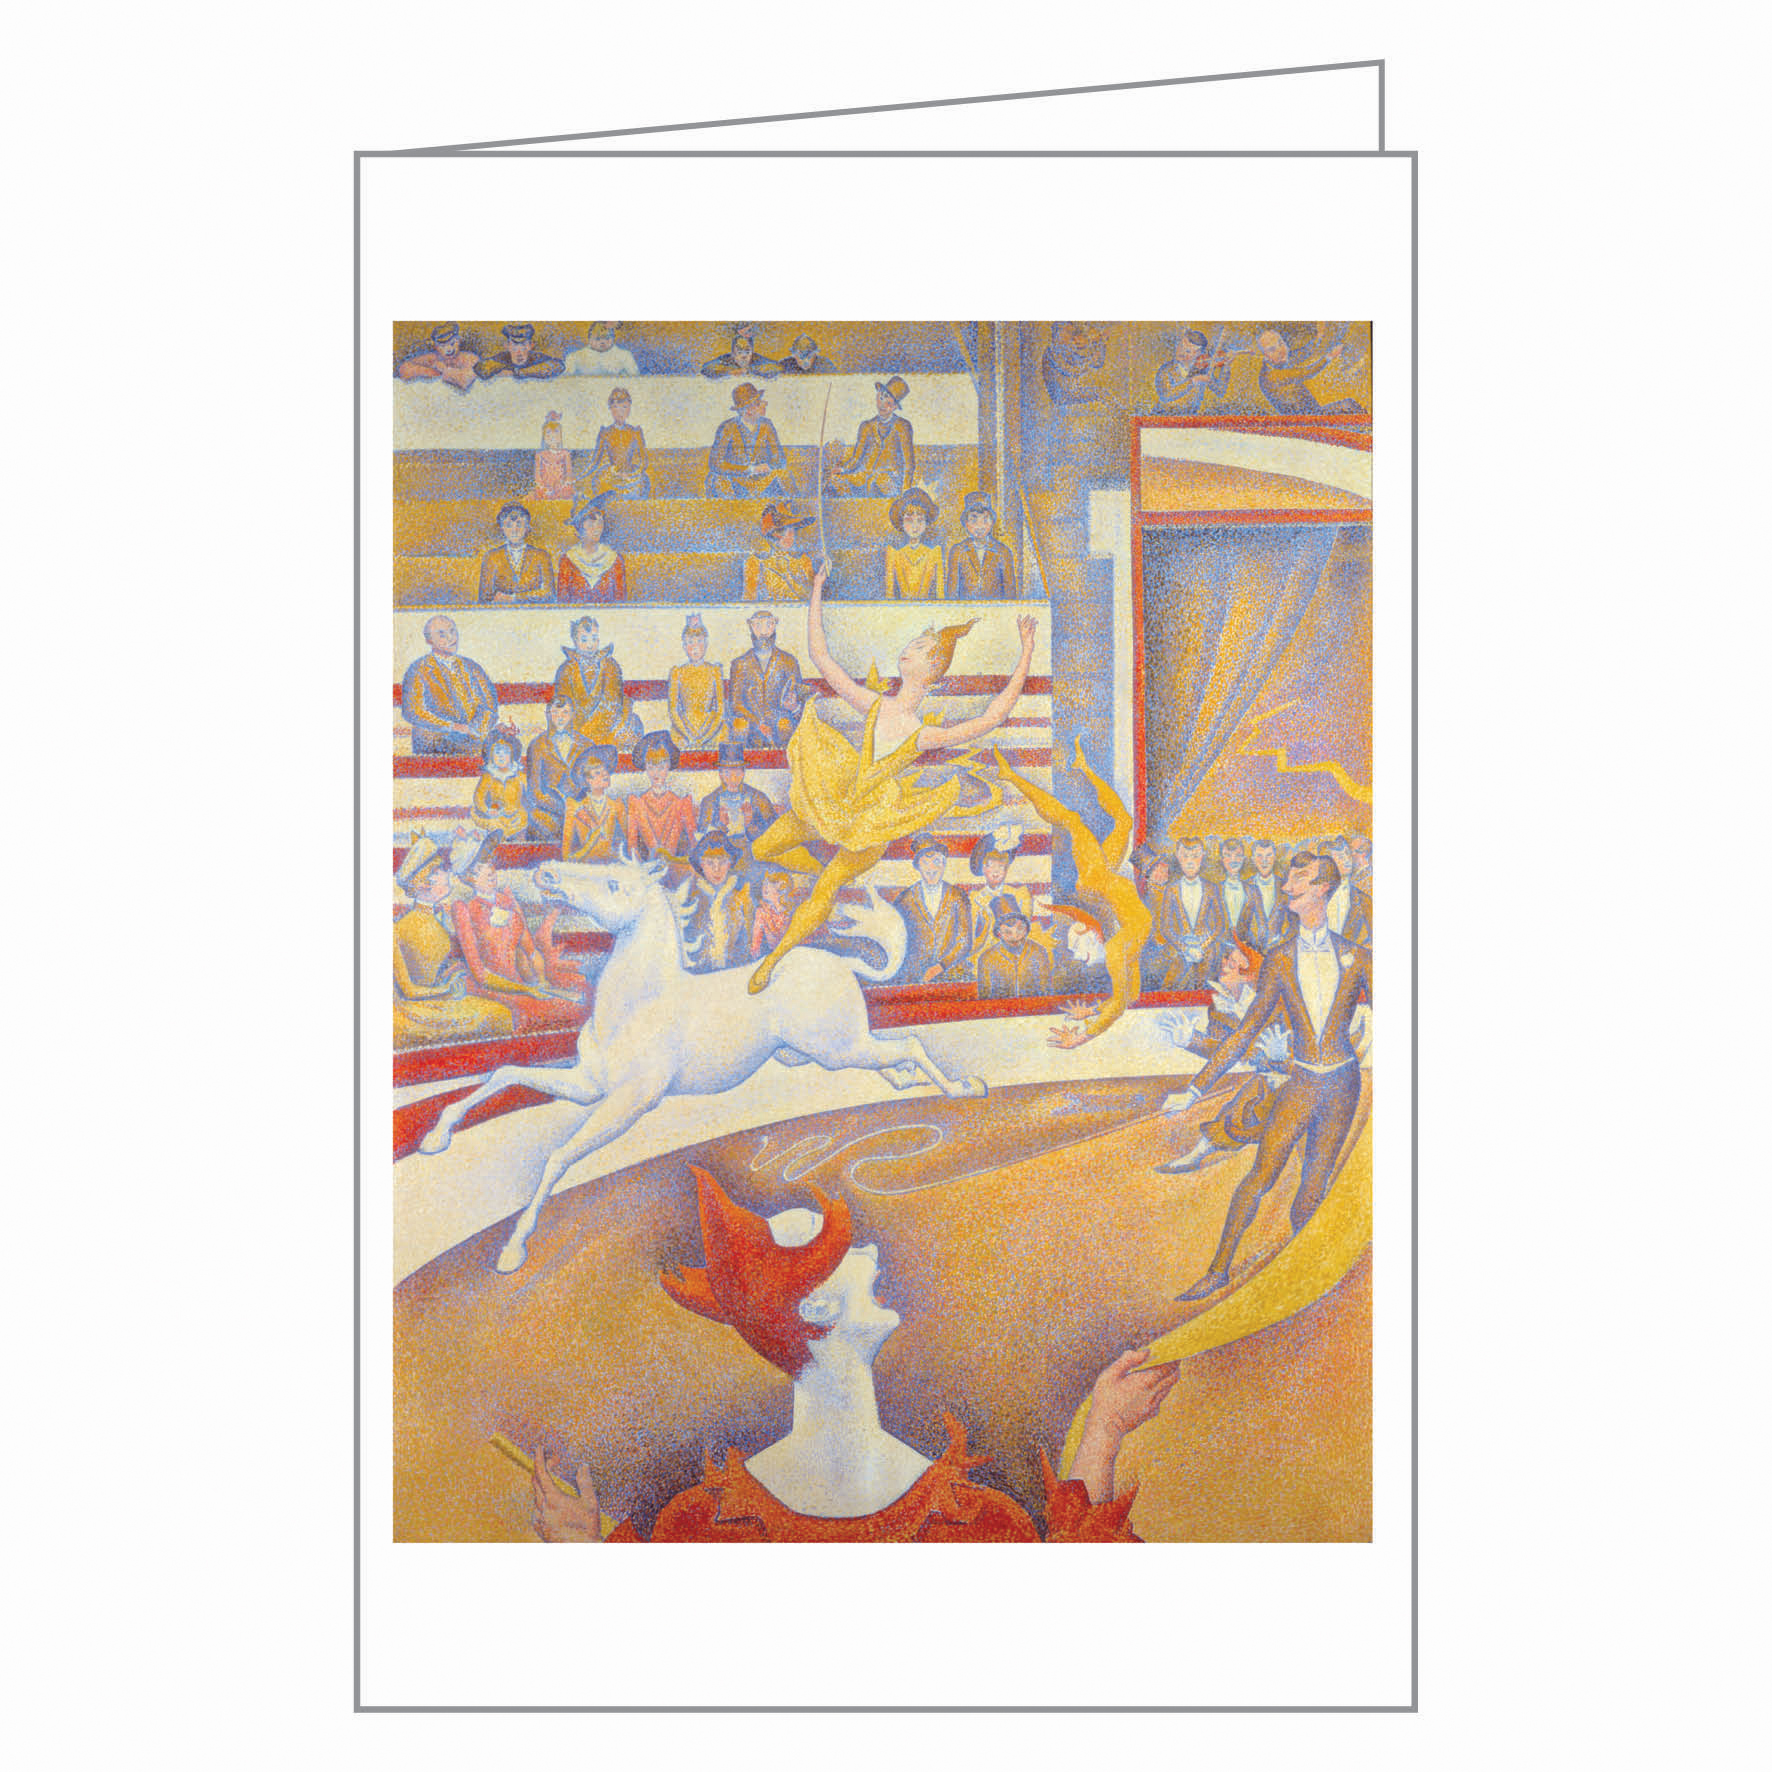 Georges Seurat's landscape painting, 'A Sunday Afternoon on the Island of La Grande Jatte', on notecard box, by teNeues stationery.